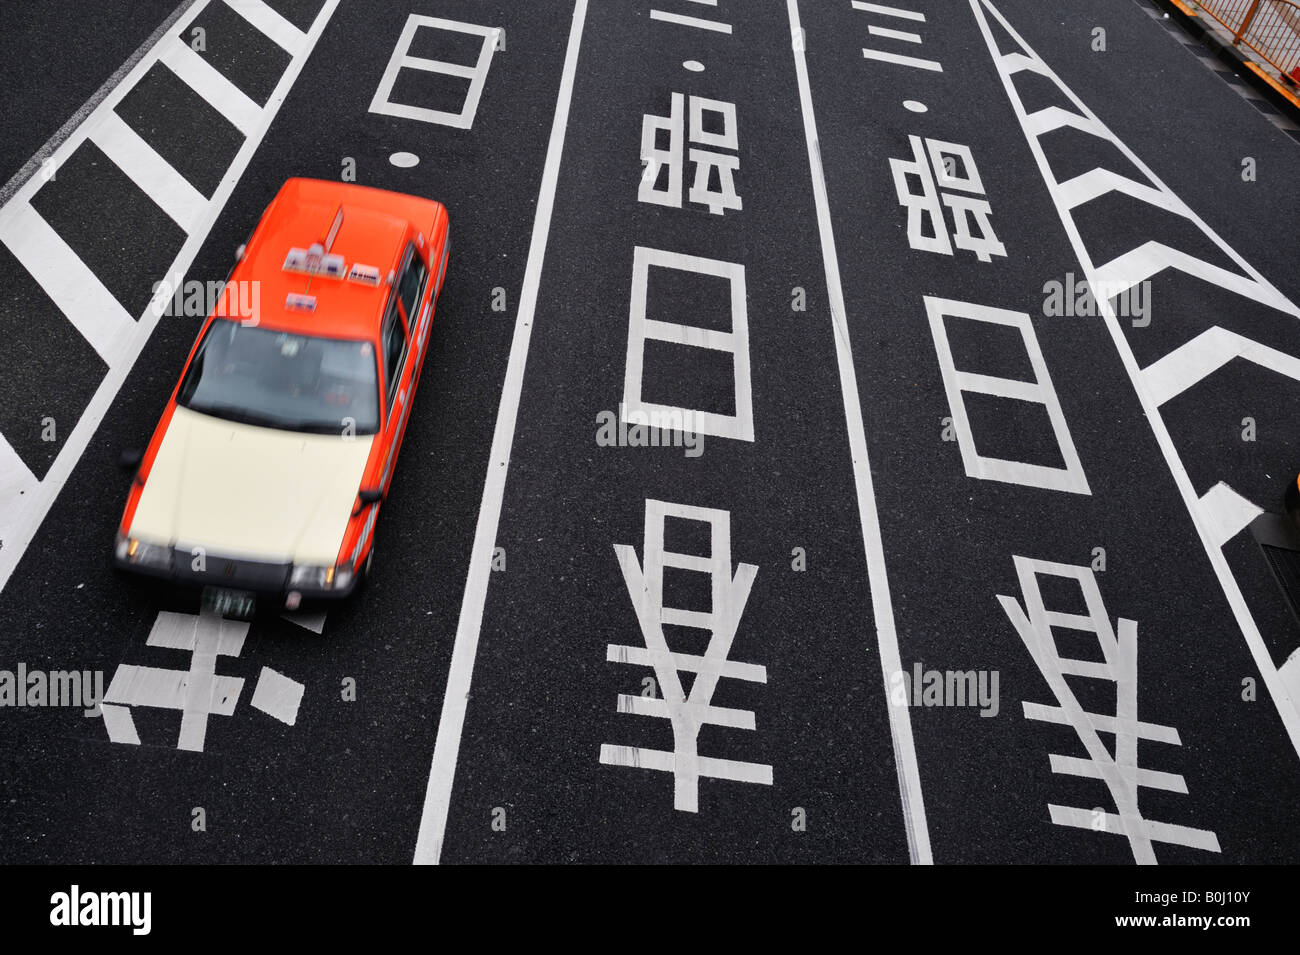 Red taxi drives over road lane direction markings in Kanji writing in Tokyo Japan Stock Photo